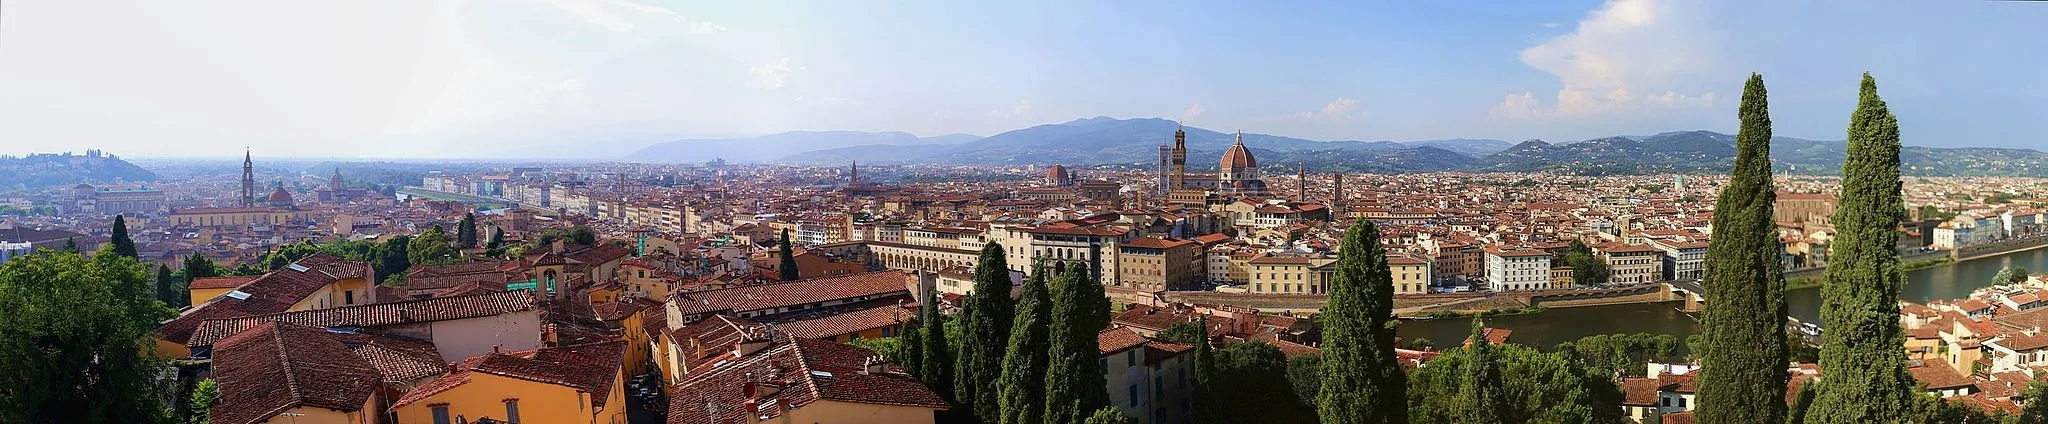 Photo showing: Panorama composite, overview of Firenze, taken from the Giardino Bardini viewpoint.